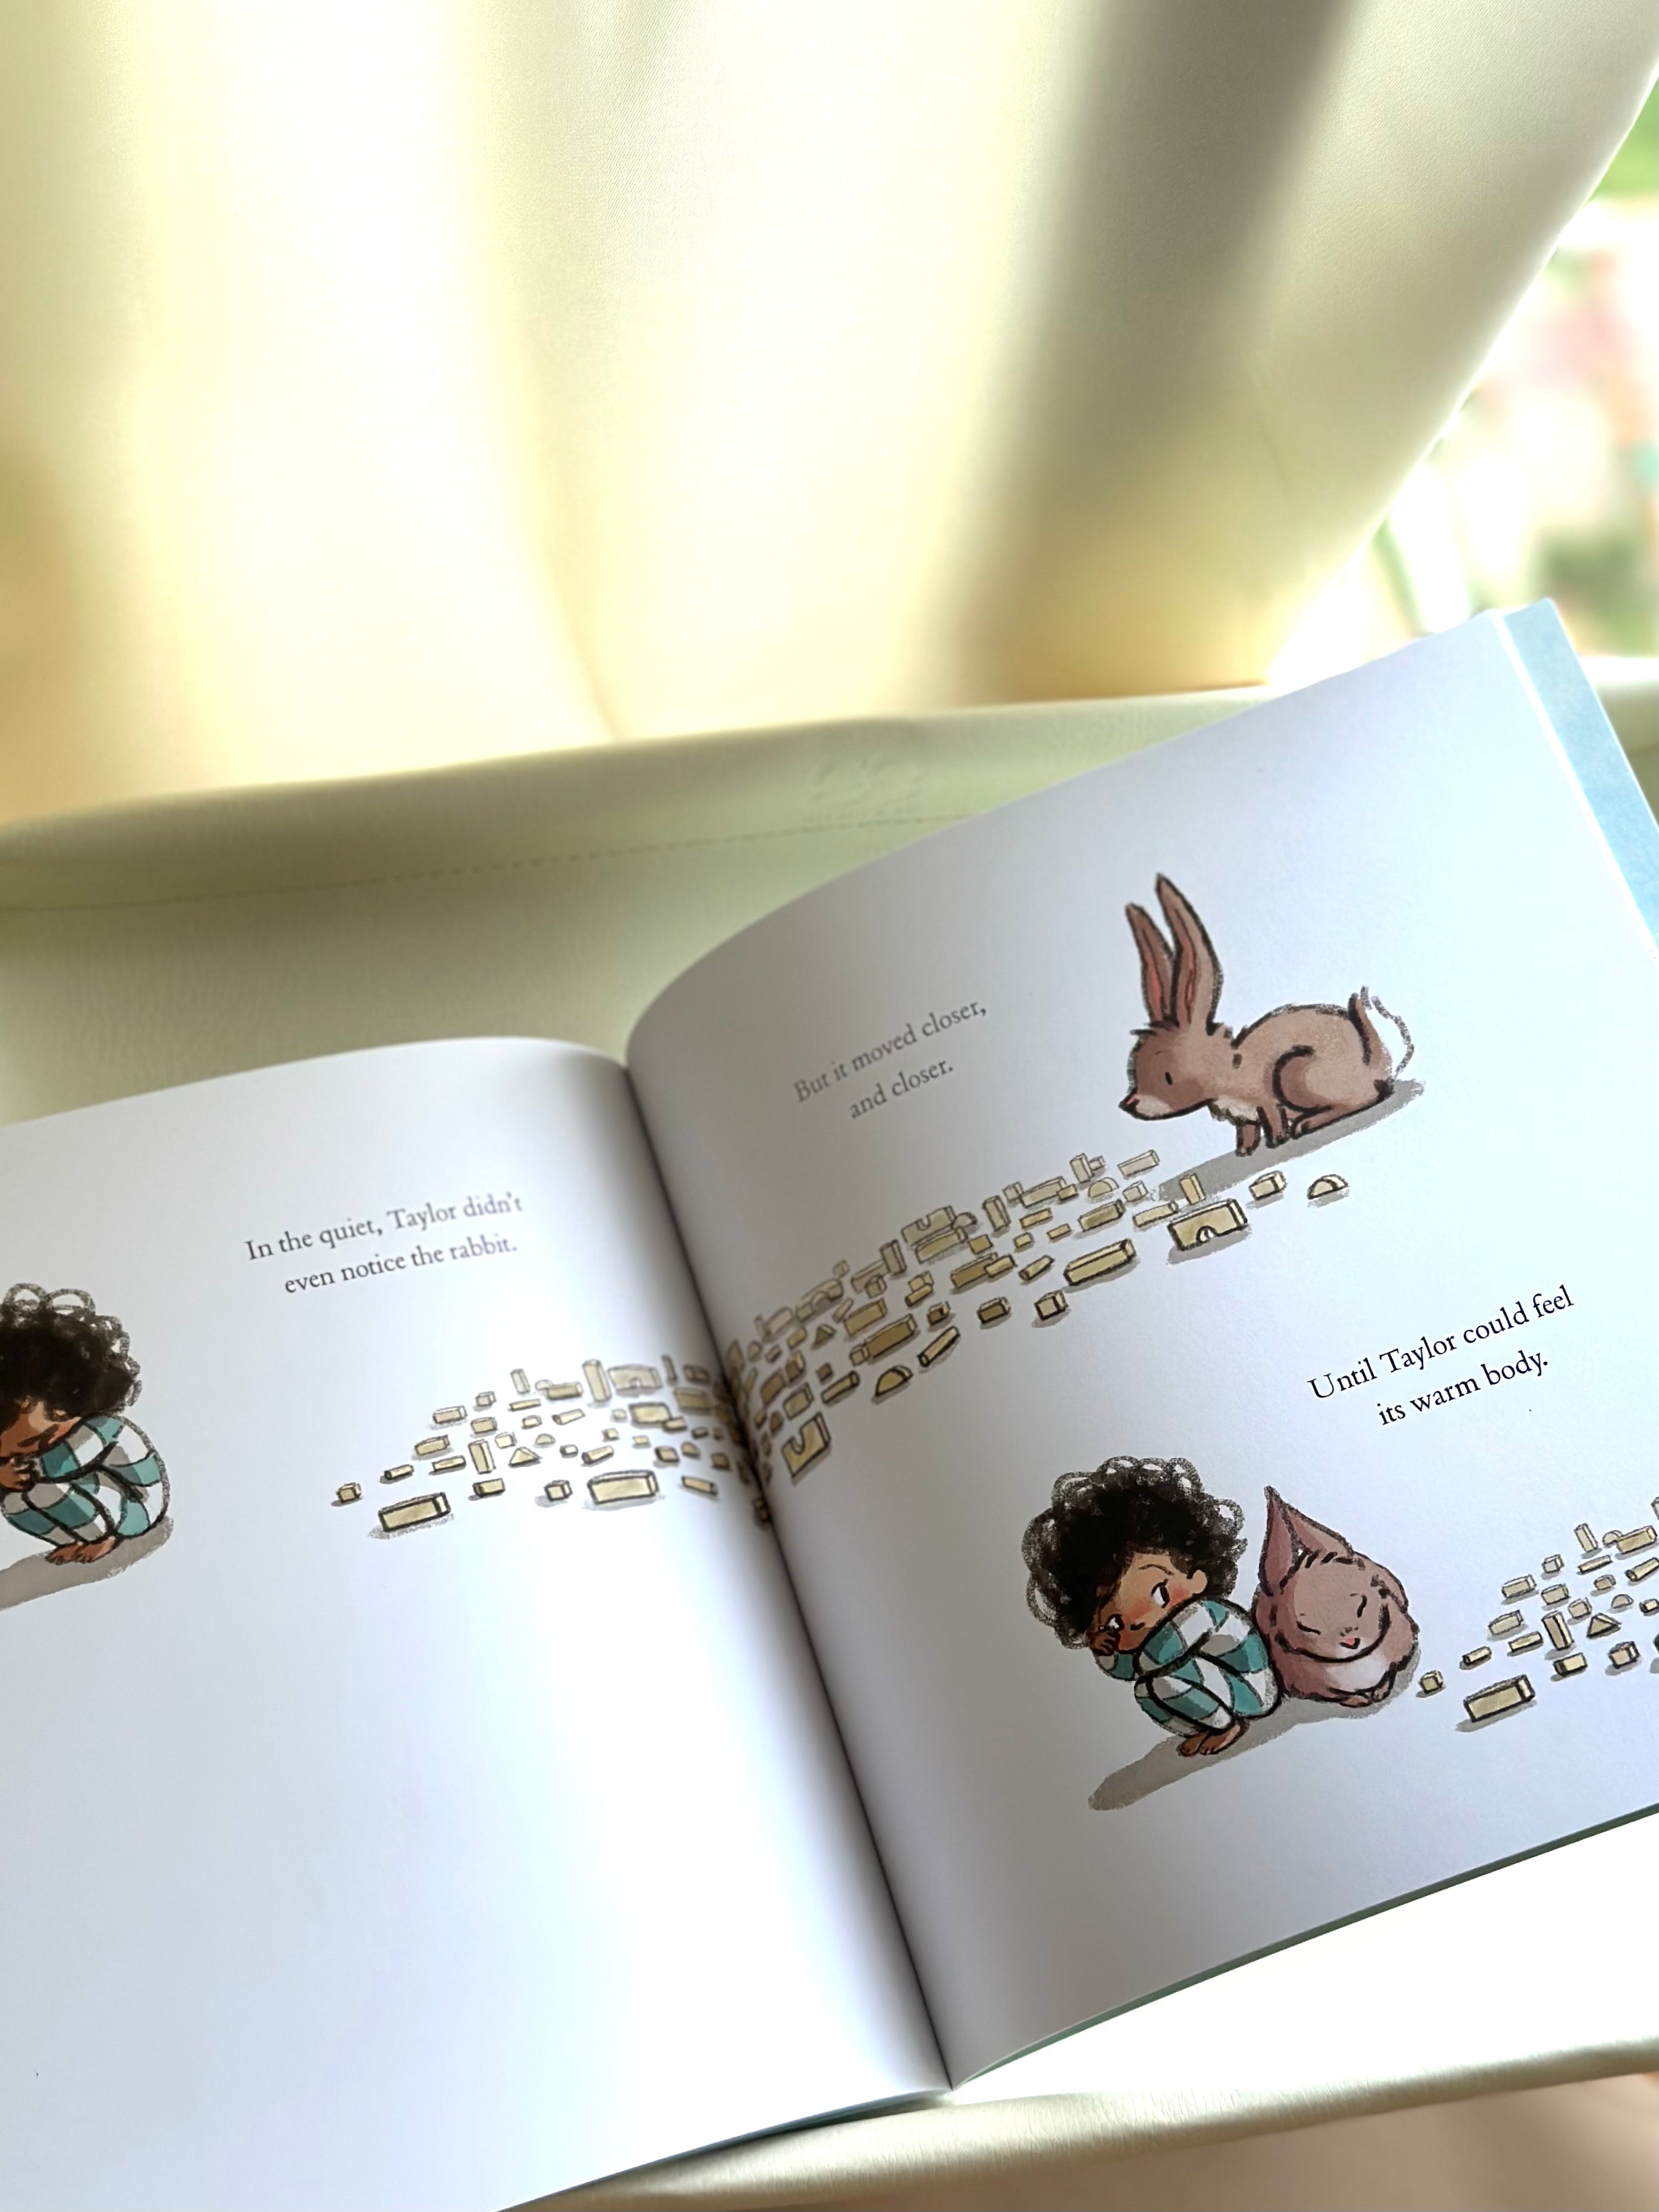 The Rabbit Listened [Book]